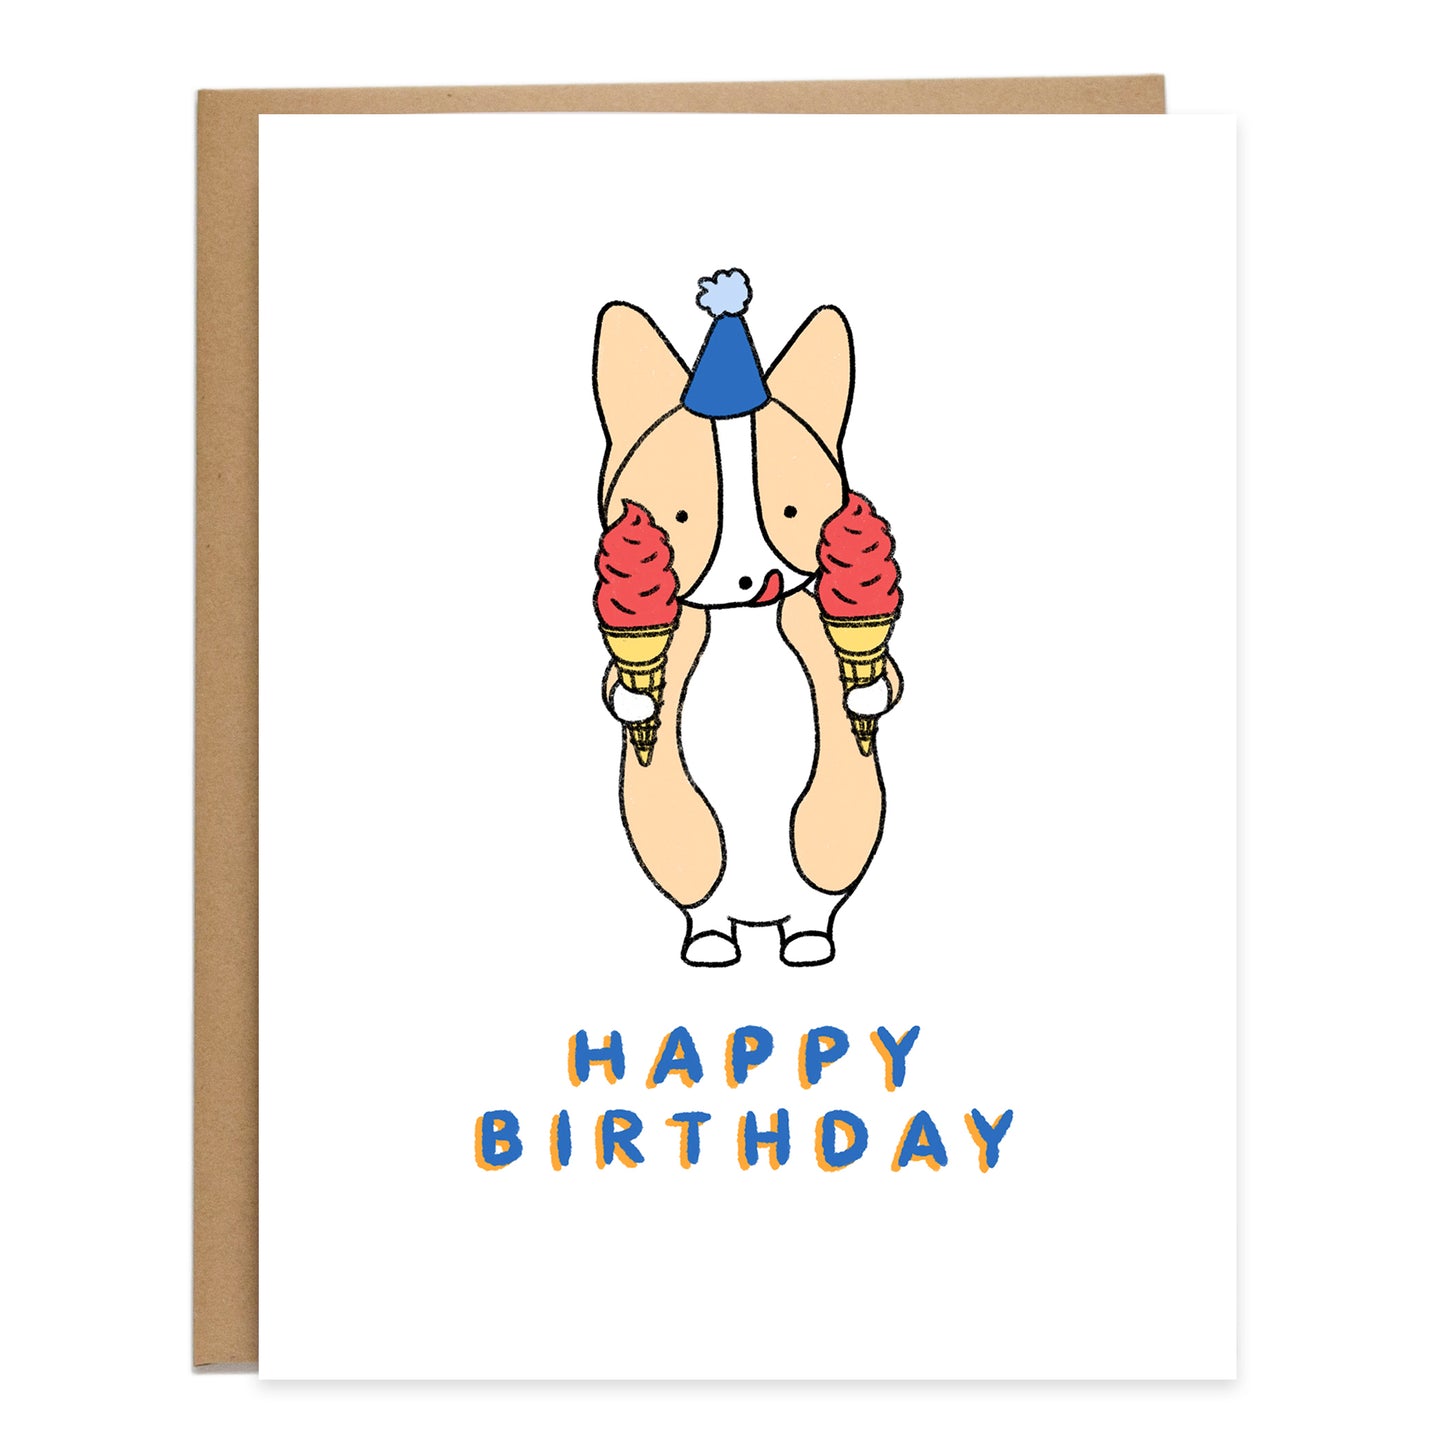 a drawing of a corgi wearing a blue birthday hat holding a cherry dip soft serve ice cream on a cone in its hands. card reads happy birthday in blue and orange